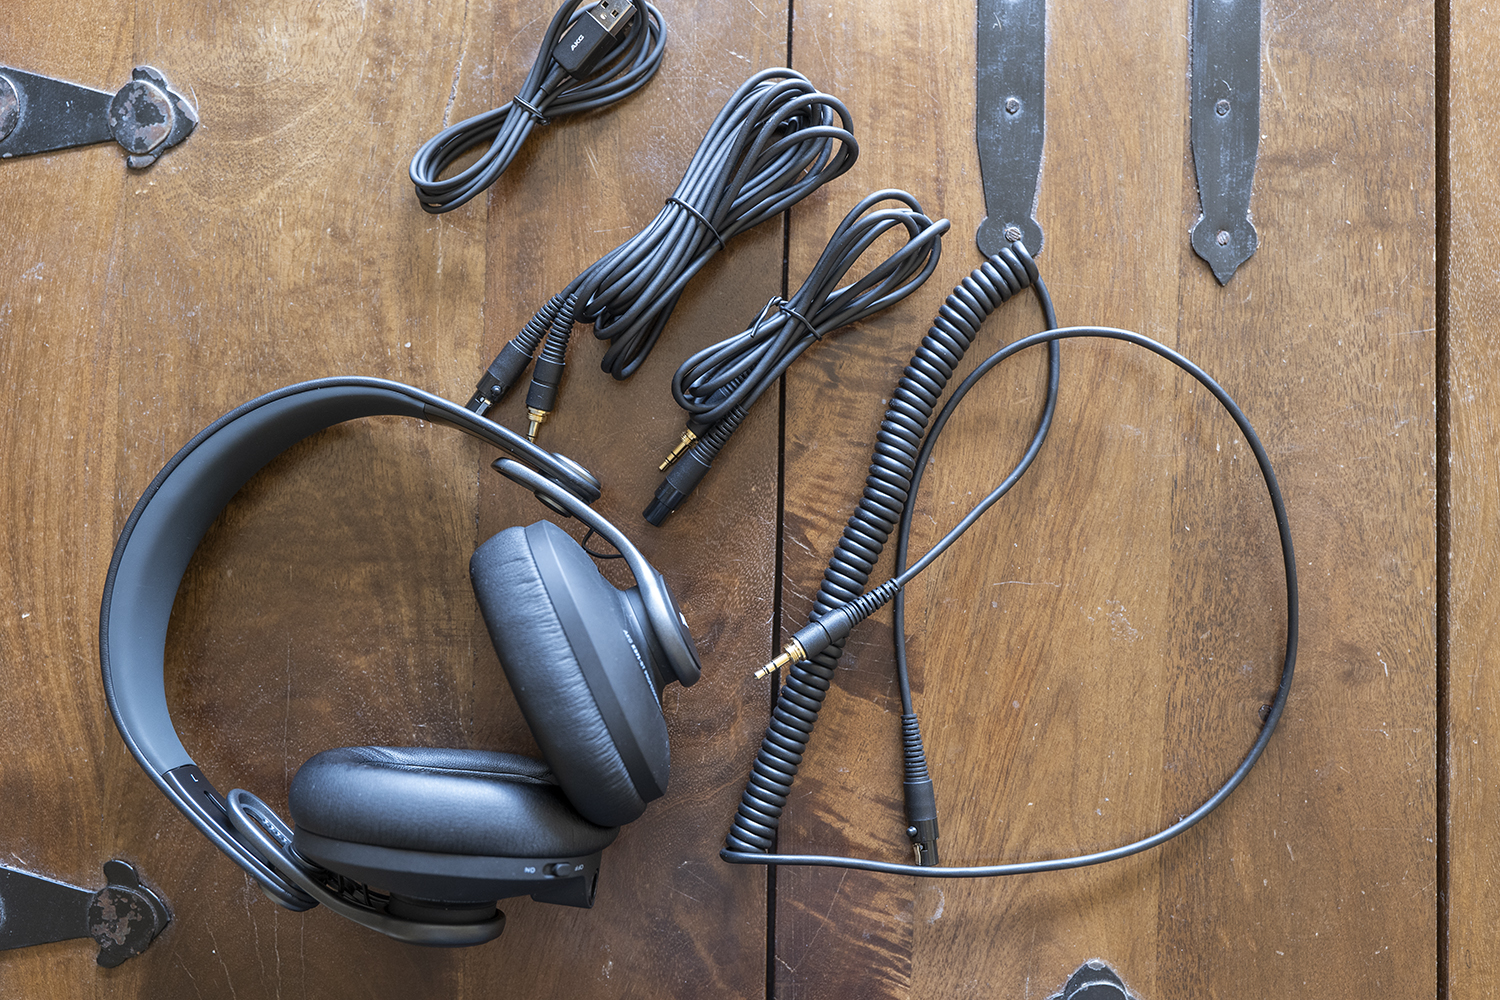 How to Connect Headphones to a TV | Digital Trends